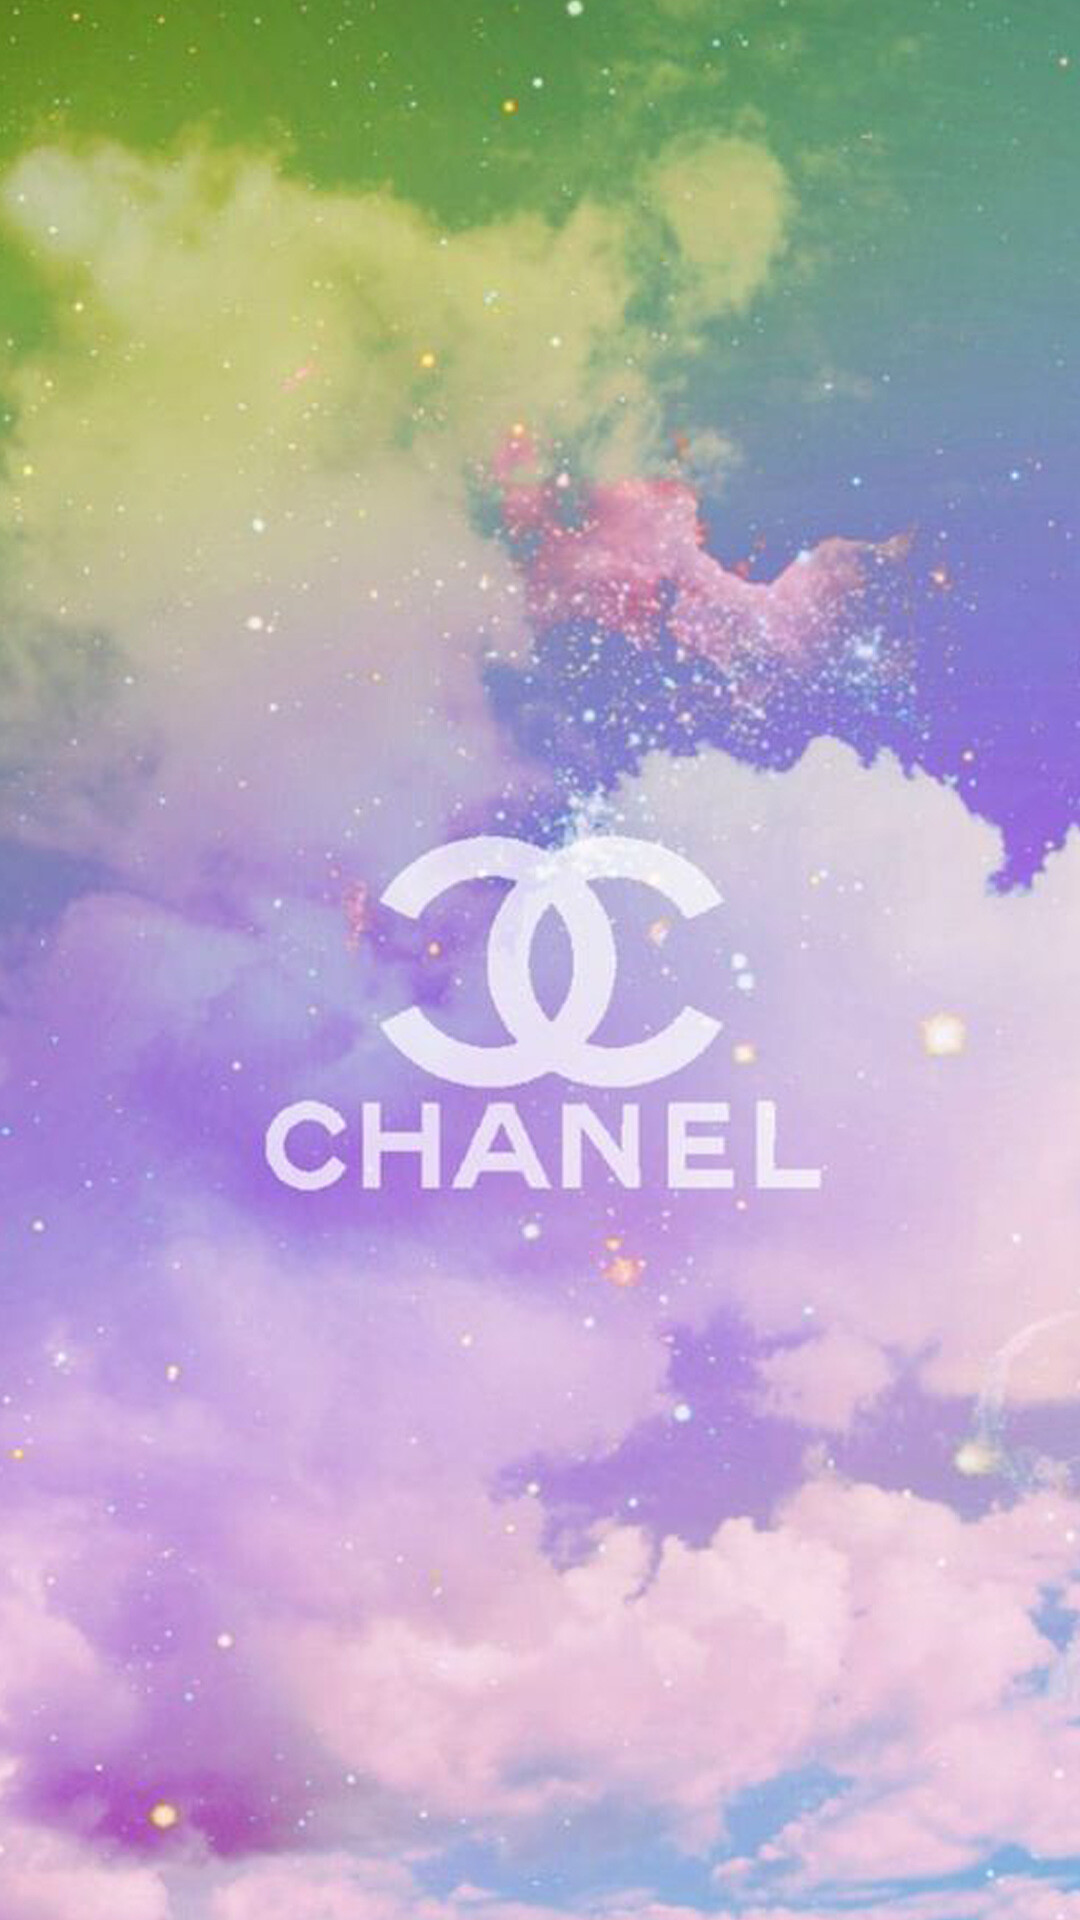 Chanel: The logo of the double C´s is metaphorically related to a broken chain that symbolizes the dependence of women on men. 1080x1920 Full HD Wallpaper.